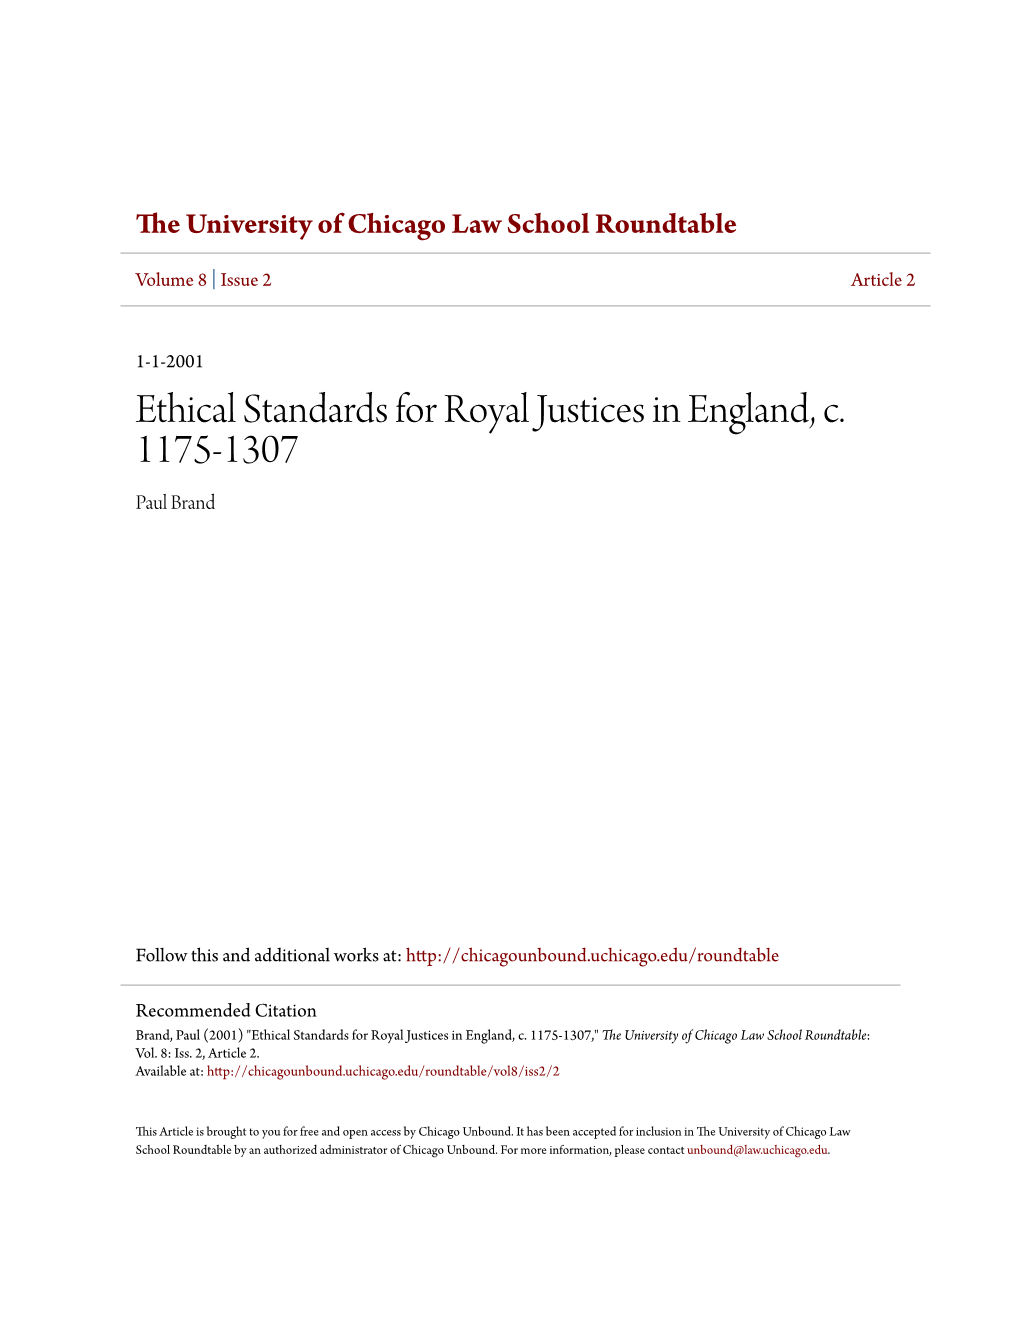 Ethical Standards for Royal Justices in England, C. 1175-1307 Paul Brand